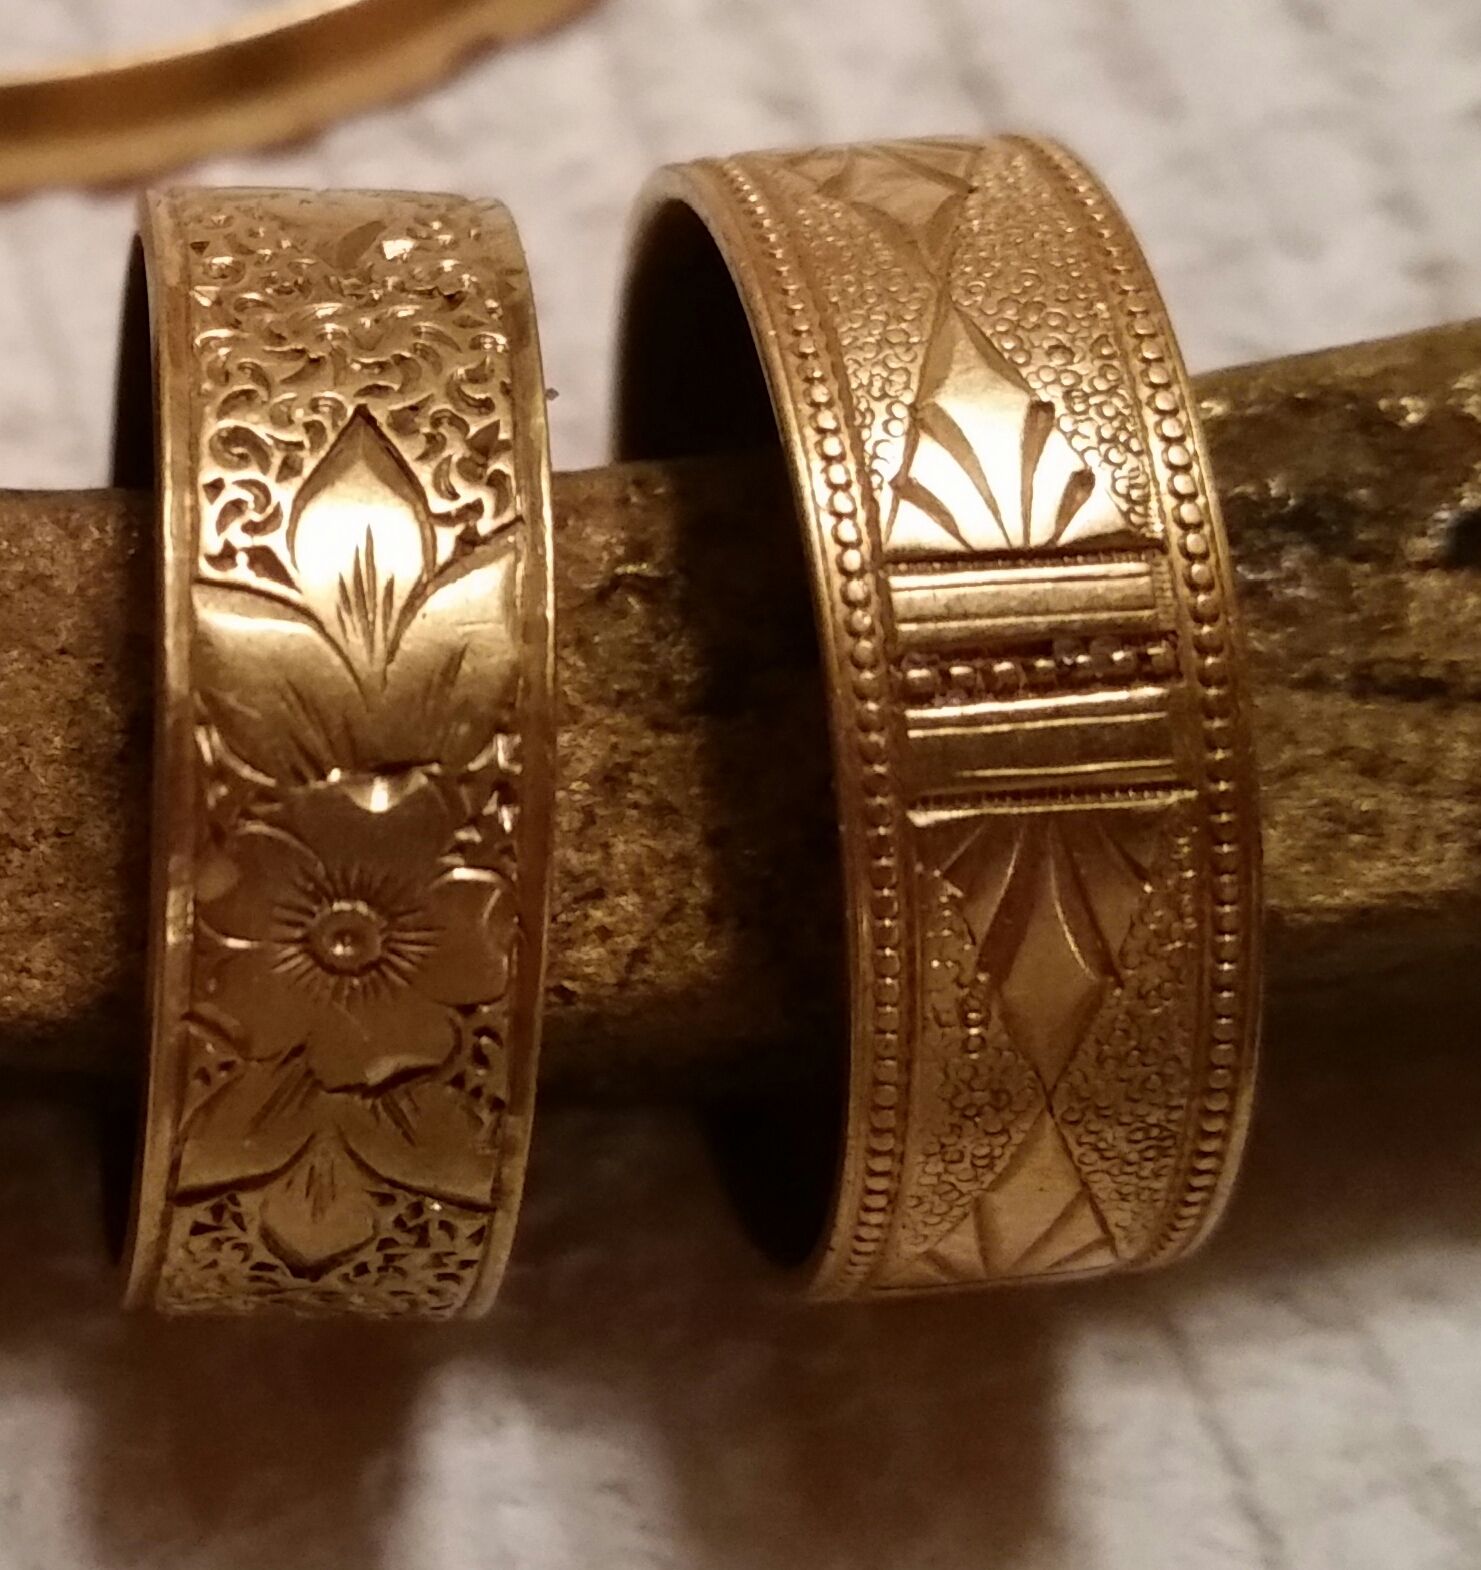 One dive two 1800's gold rings and bronze or brass ship spike